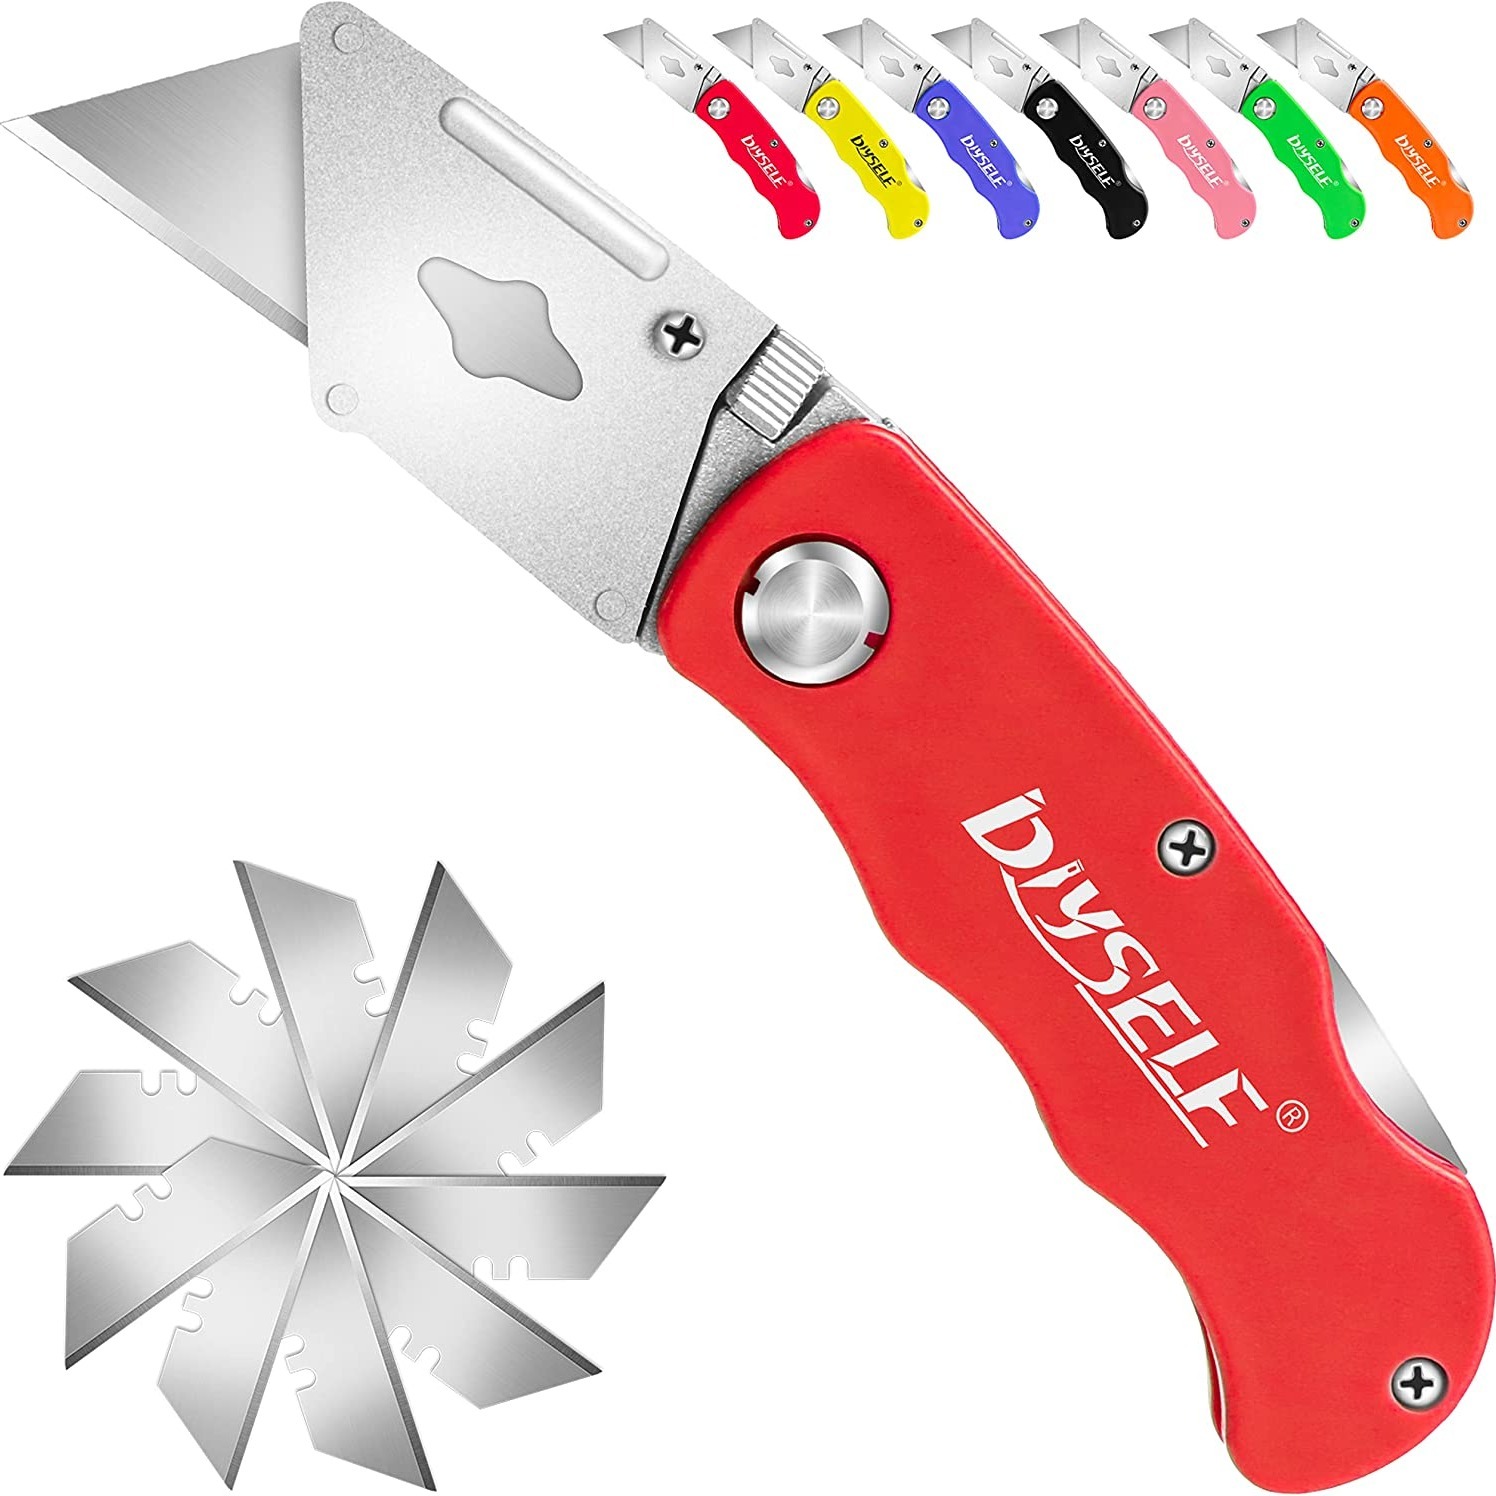  Box Cutter Retractable Utility Knife - Heavy Duty Box Cutter  Knife Cardboard Cutter - Box Opener Razor Blades Utility Knife - Box Knife  Carpet Cutter with 5 Sharp Blades : Tools & Home Improvement